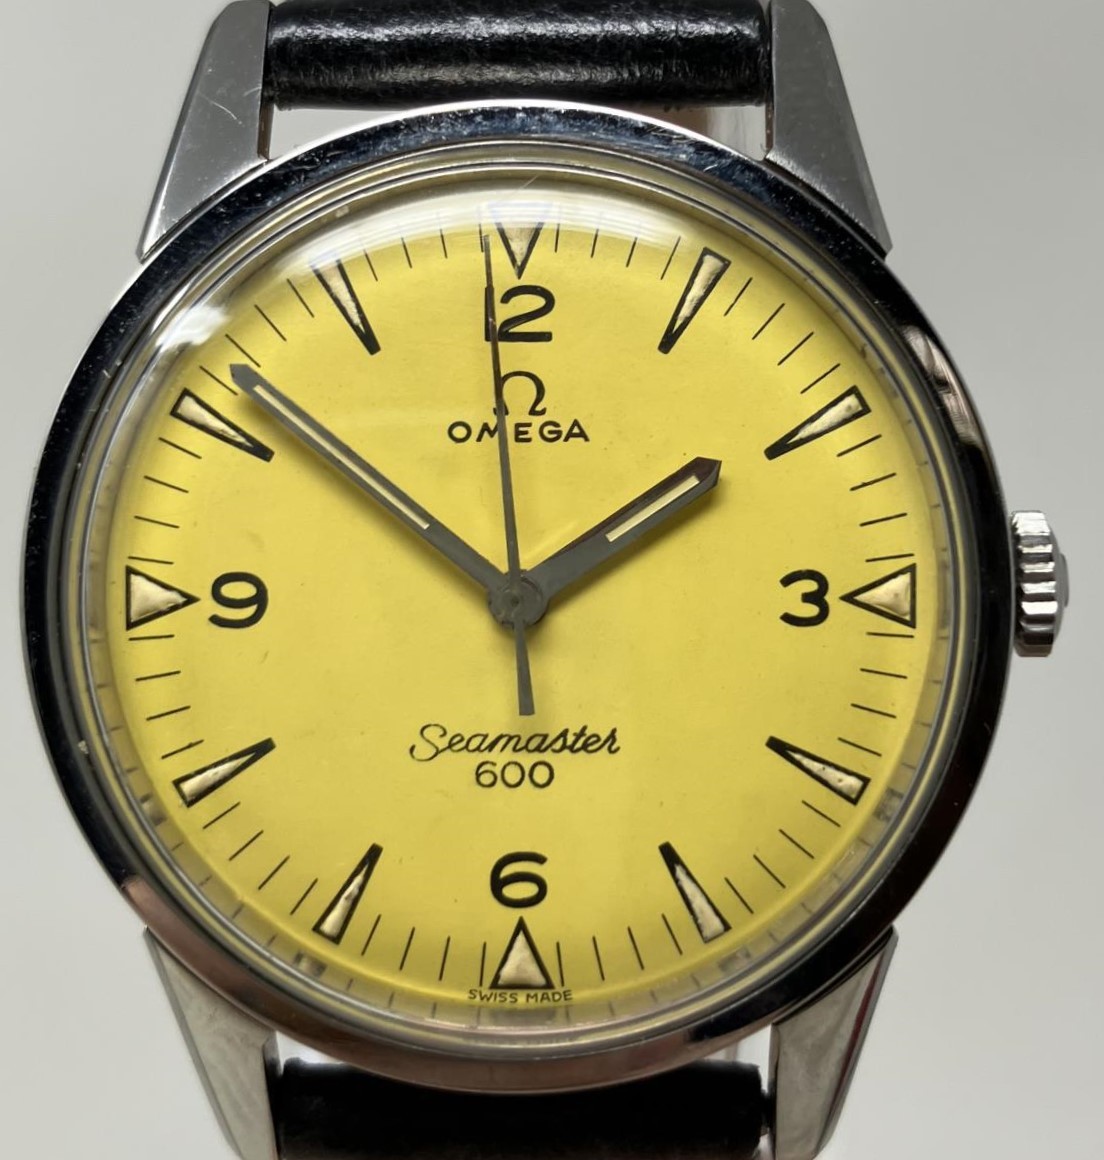 A gentleman's stainless steel Omega Seamaster 600 wristwatch, with an unusual yellow dial, on a